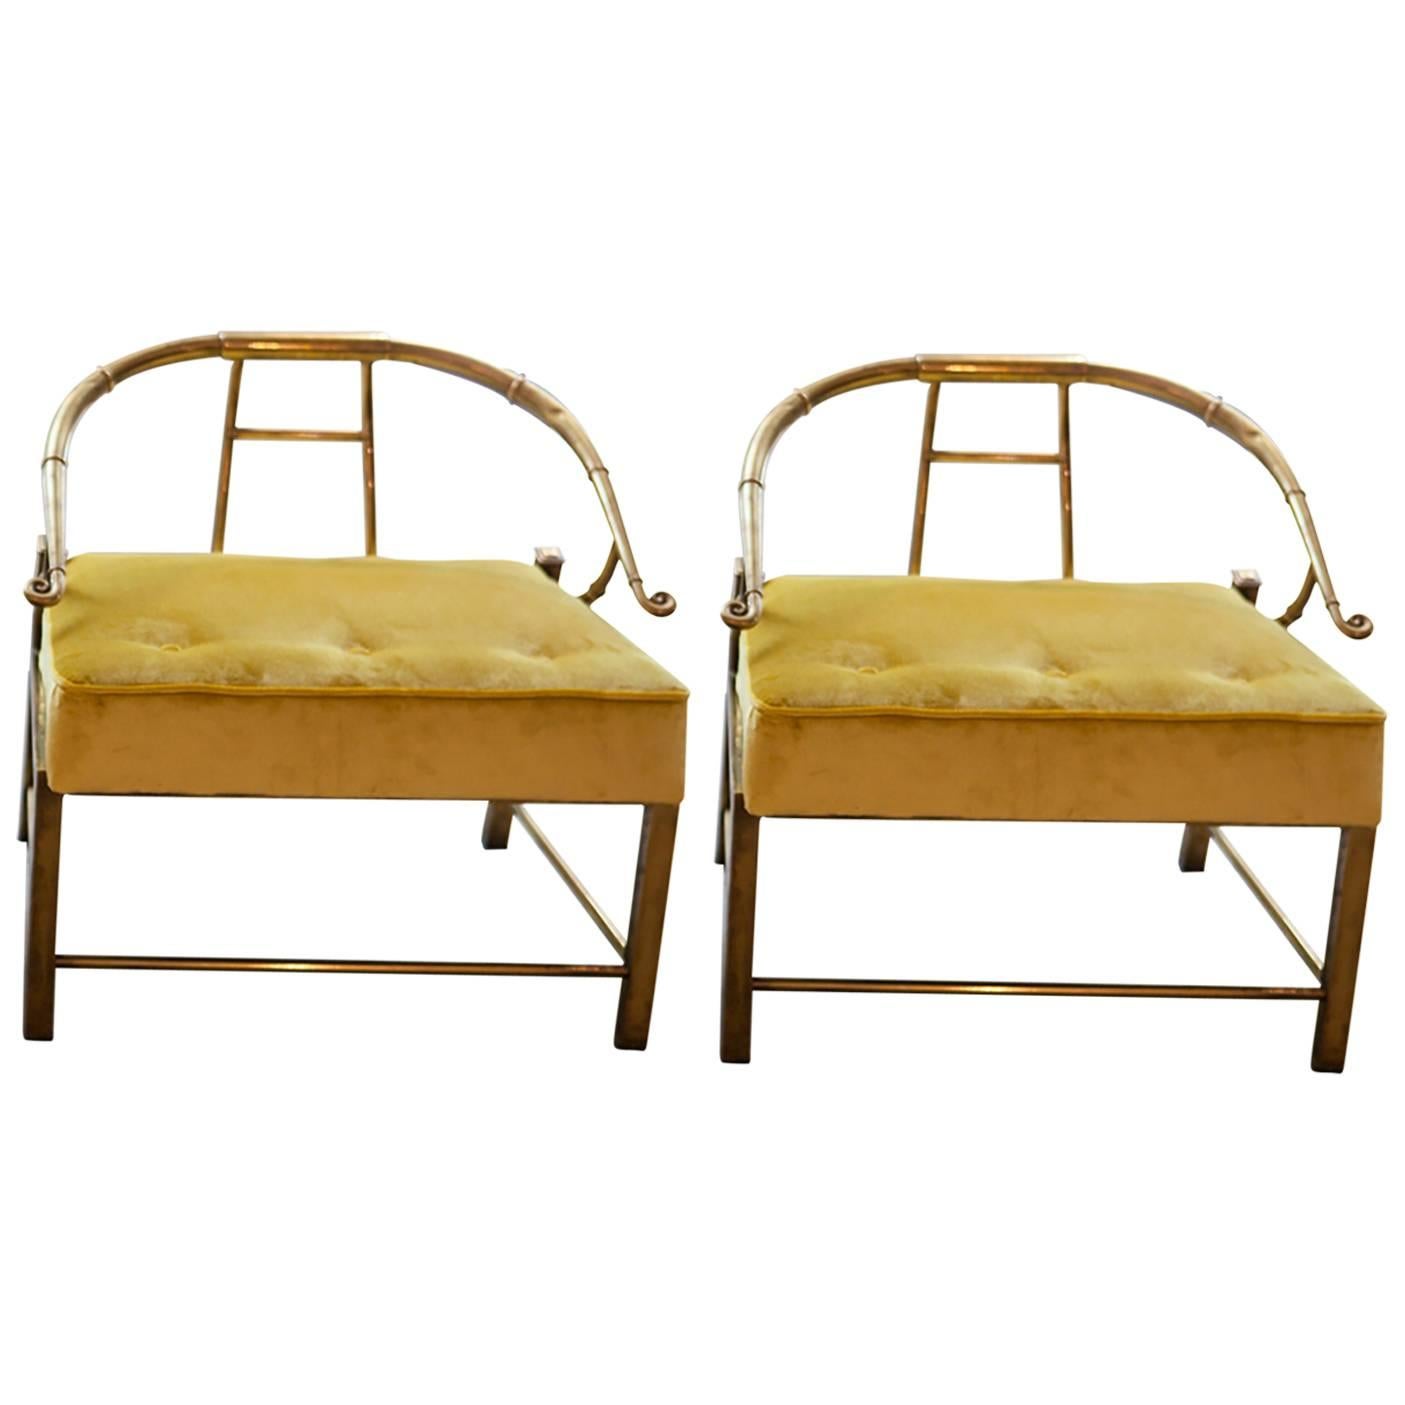 Midcentury Set of Yellow Armchairs by Mastercraft in Brass and Velvet